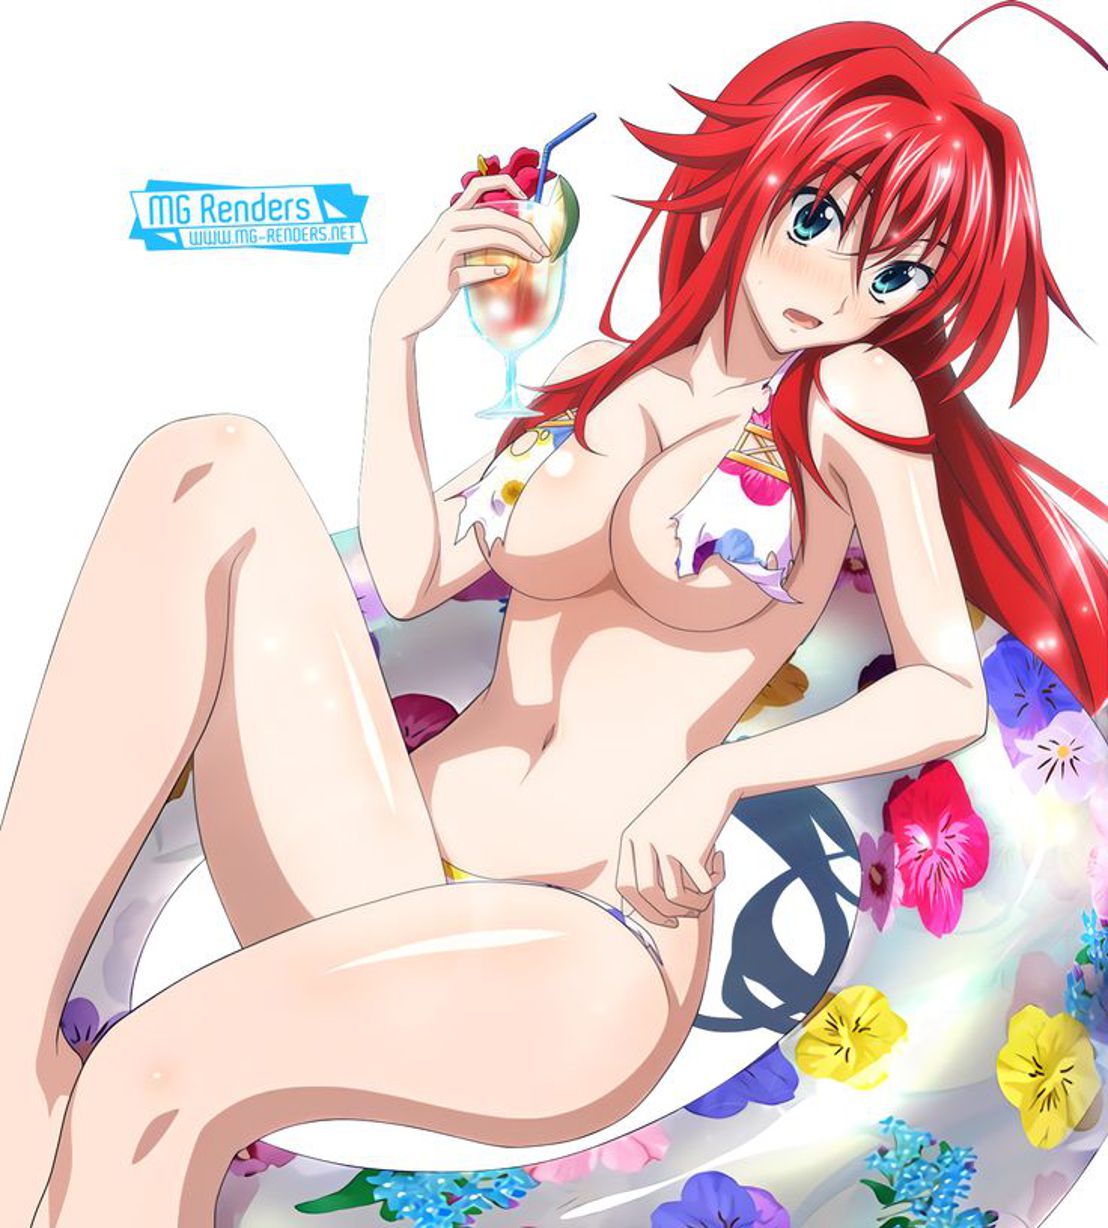 [Anime character material] png background of animated characters erotic images that 161 1